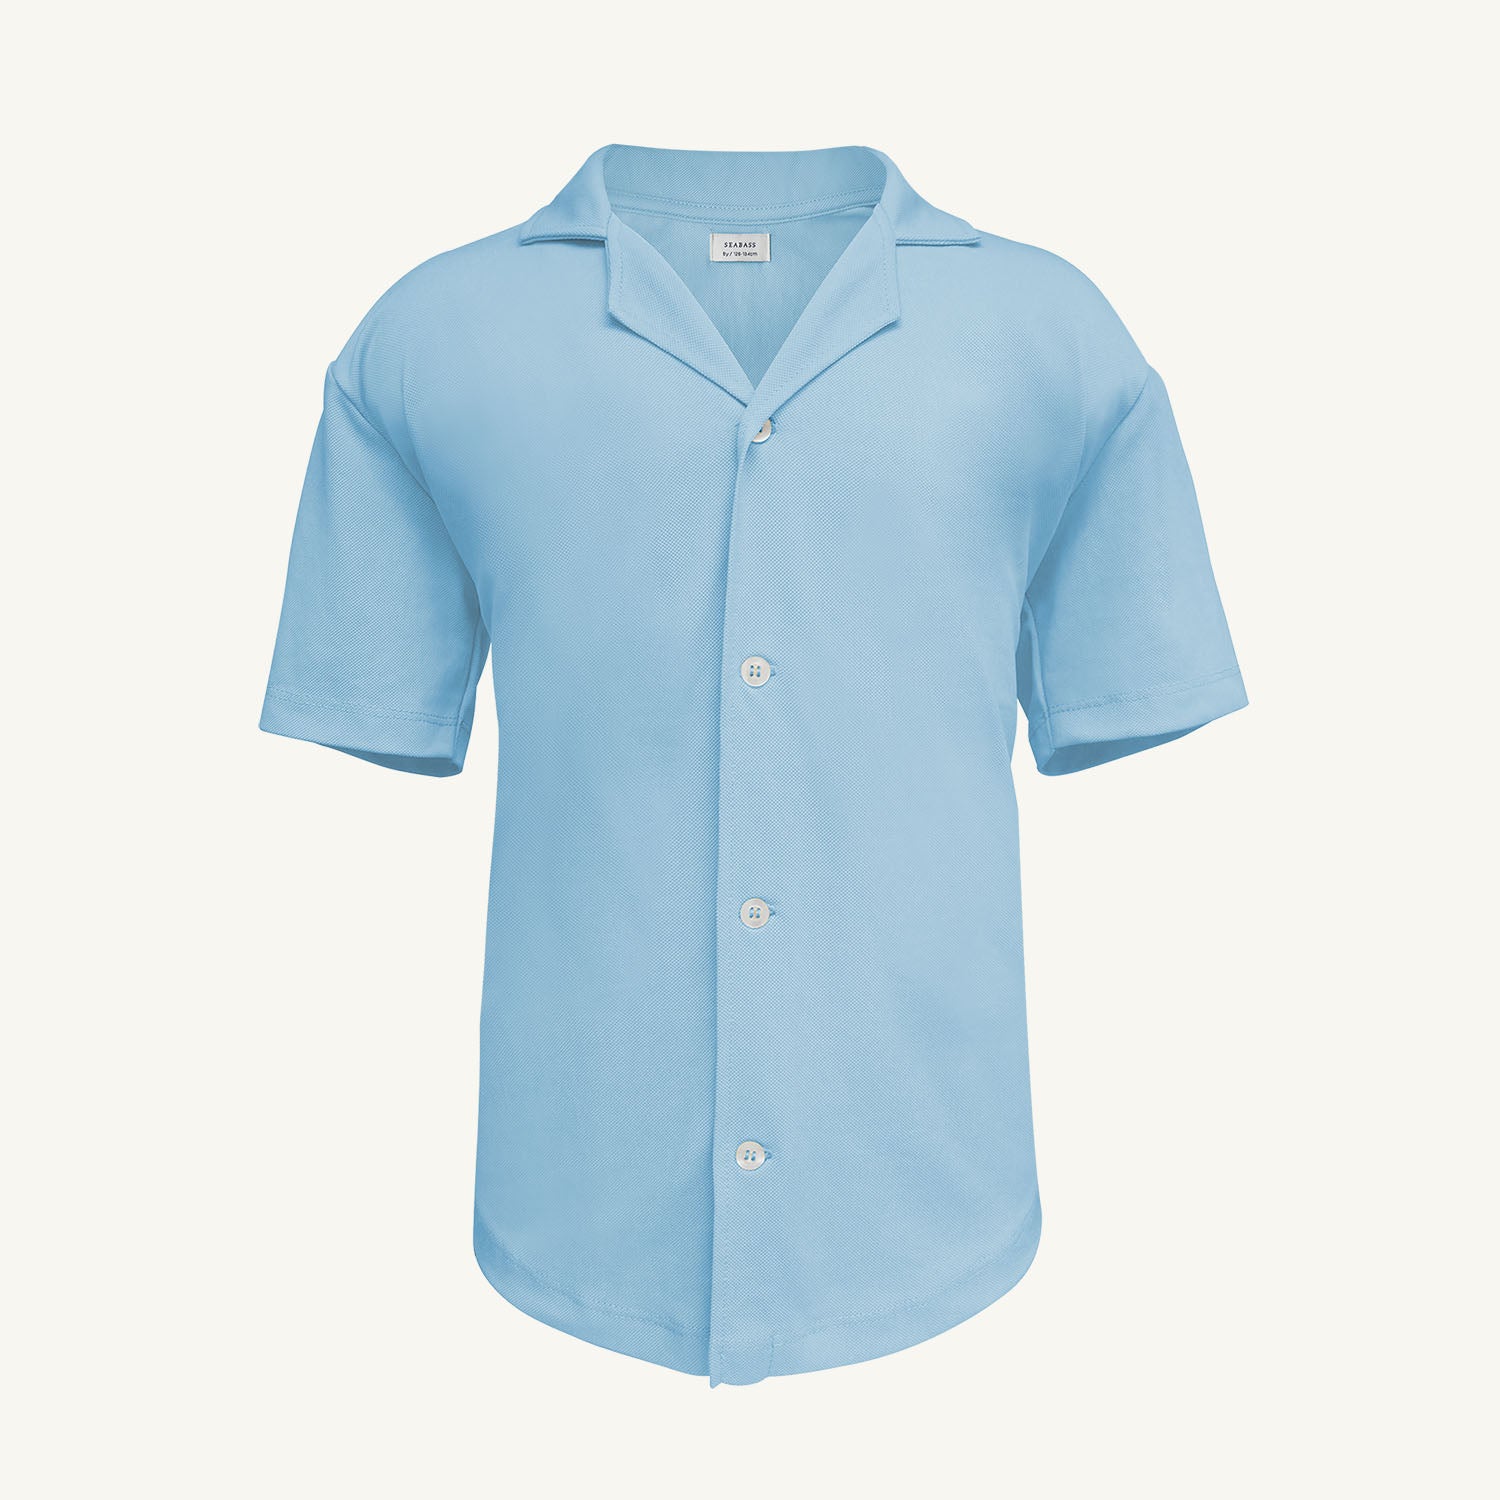 Camisa UV (UPF 50+) - Clearwater Blue Hombre